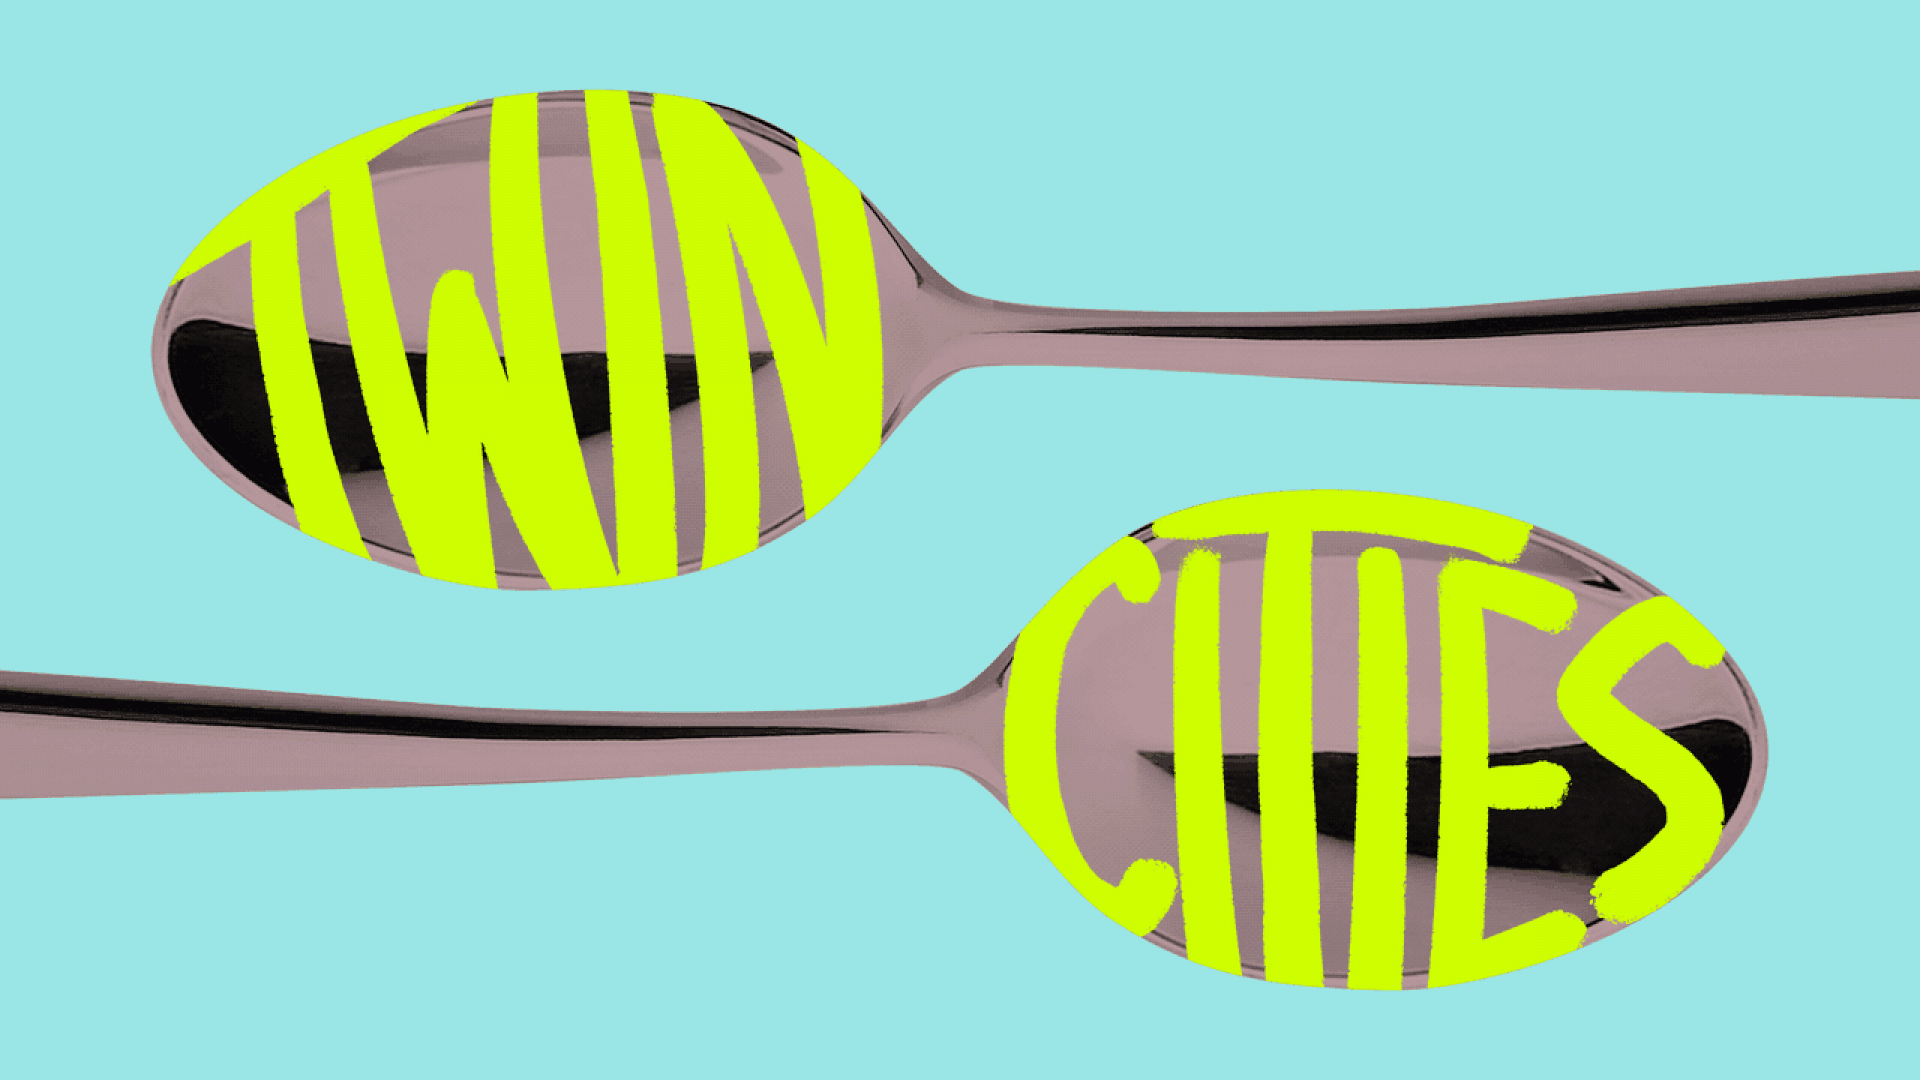 Illustration of two spoons with text reading "Twin Cities" that changes to "MPLS" and "St. P."